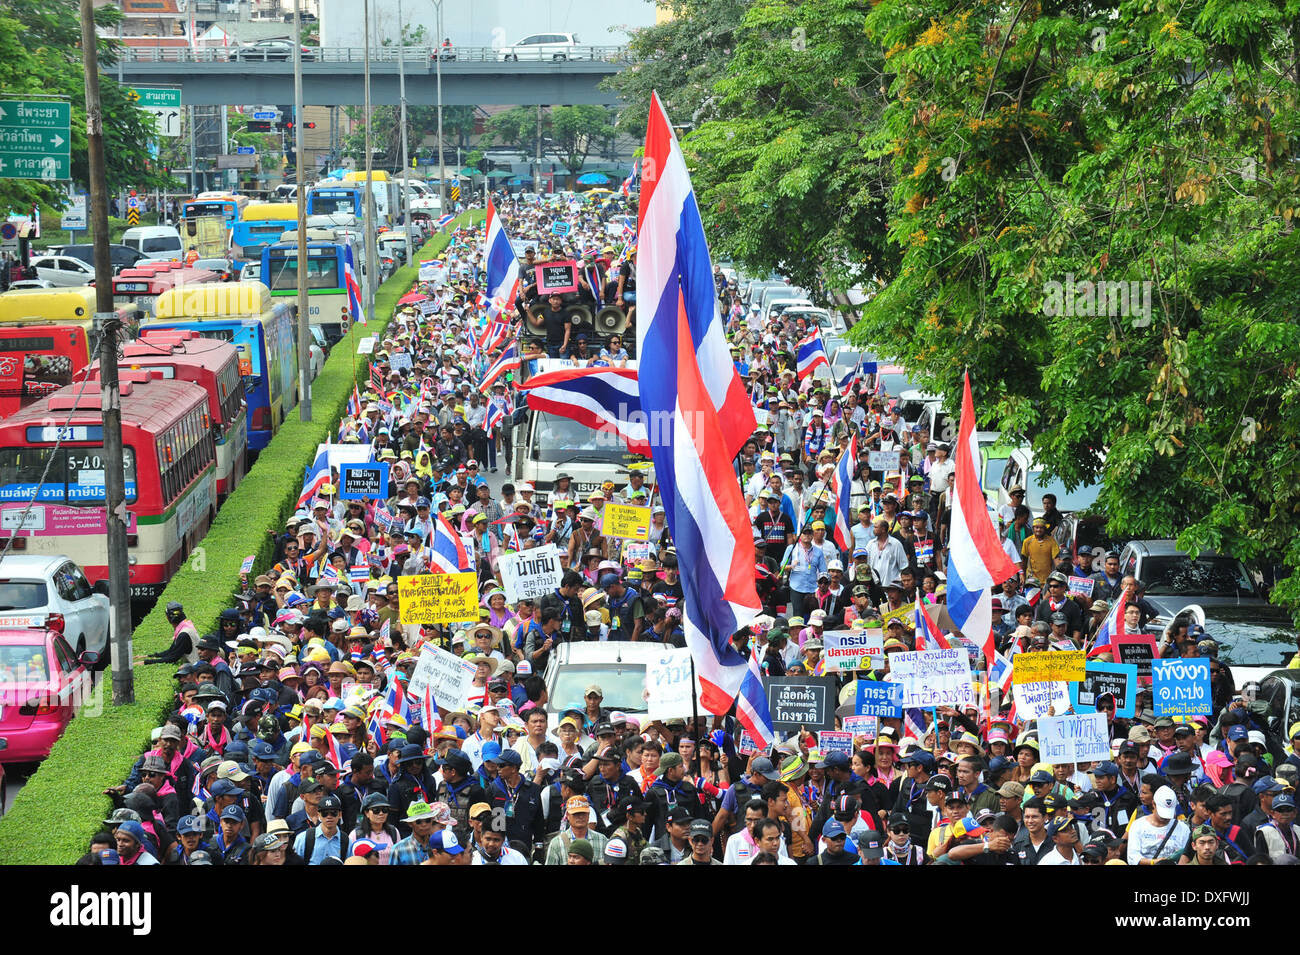 Bangkok, Thailand. 26th Mar, 2014. Anti-government supporters march through streets in Bangkok, Thailand, March 26, 2014. People's Democratic Reform Committee protesters marched in Bangkok for the third day to invite Bangkok people to join their mass rally on Saturday. Credit:  Rachen Sageamsak/Xinhua/Alamy Live News Stock Photo